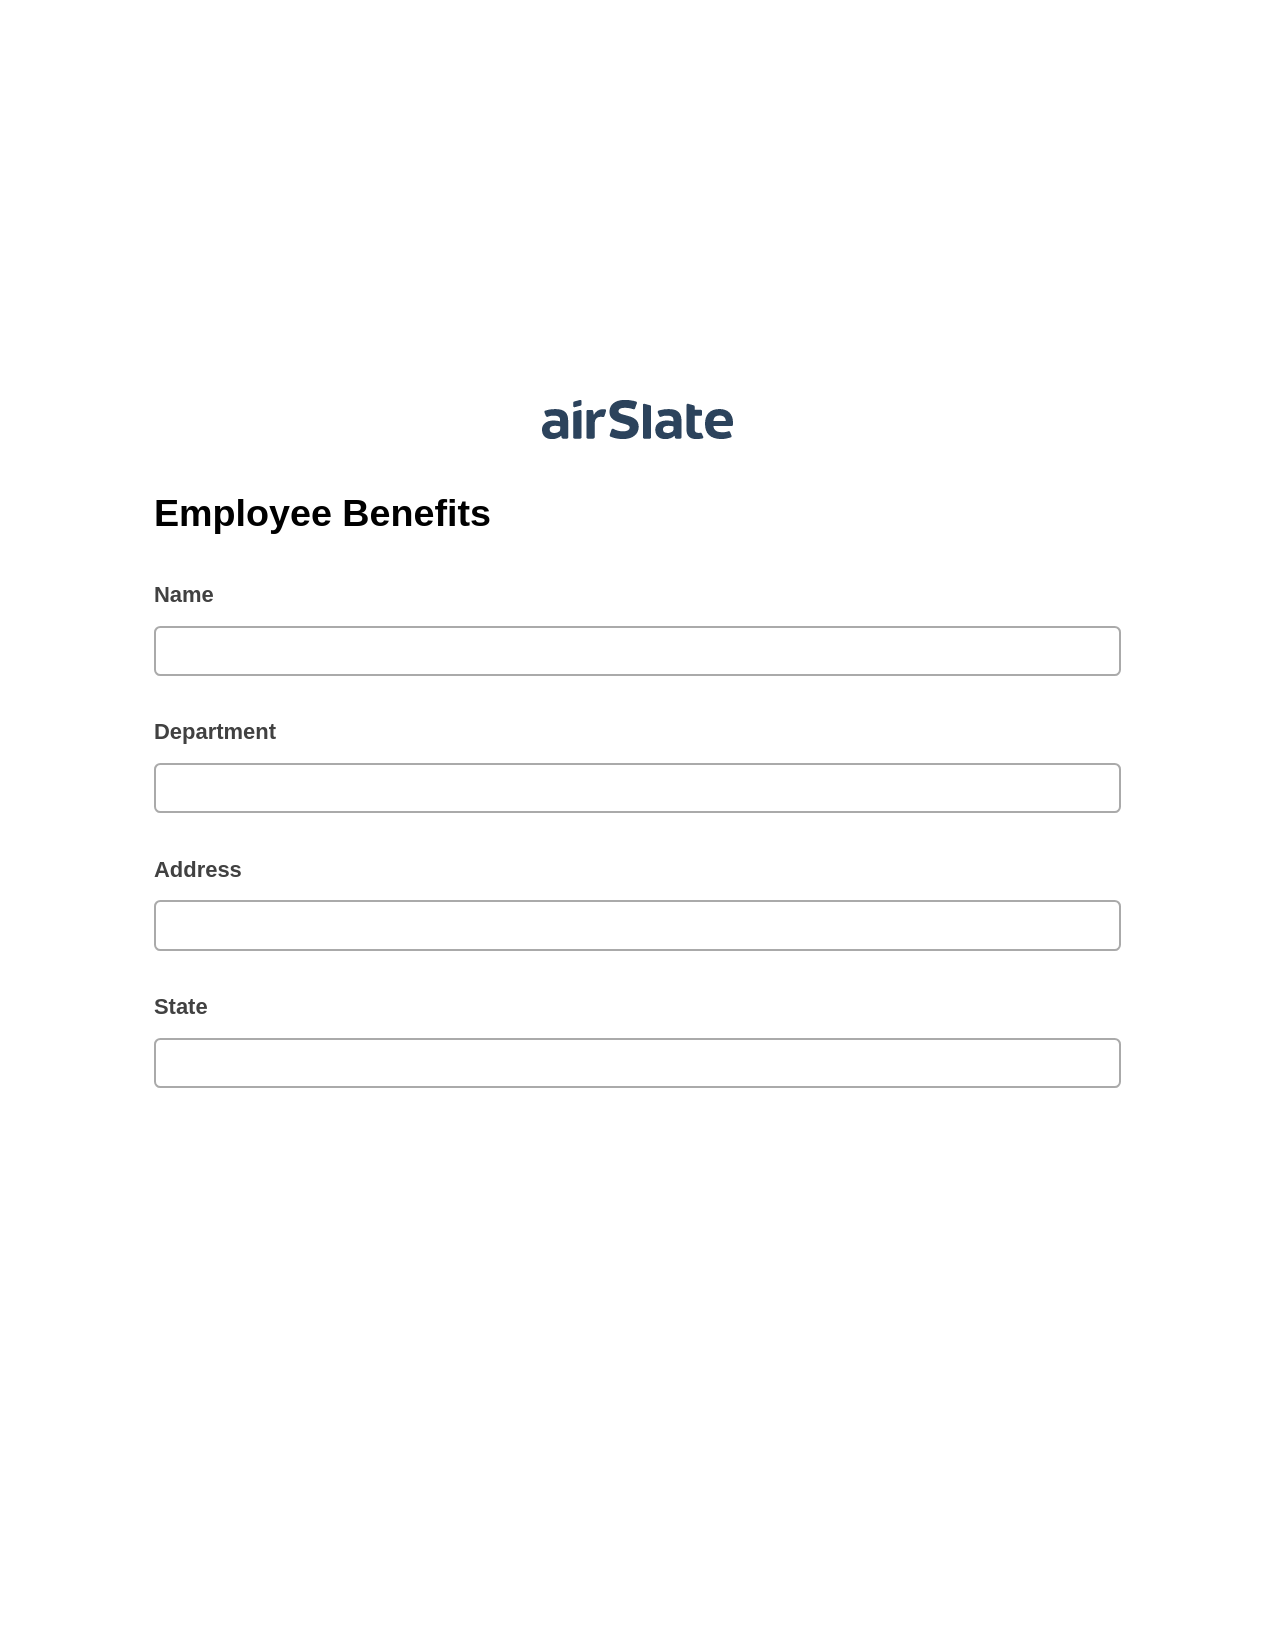 Multirole Employee Benefits Pre-fill from CSV File Bot, Pre-fill with Custom Data Bot, Slack Two-Way Binding Bot